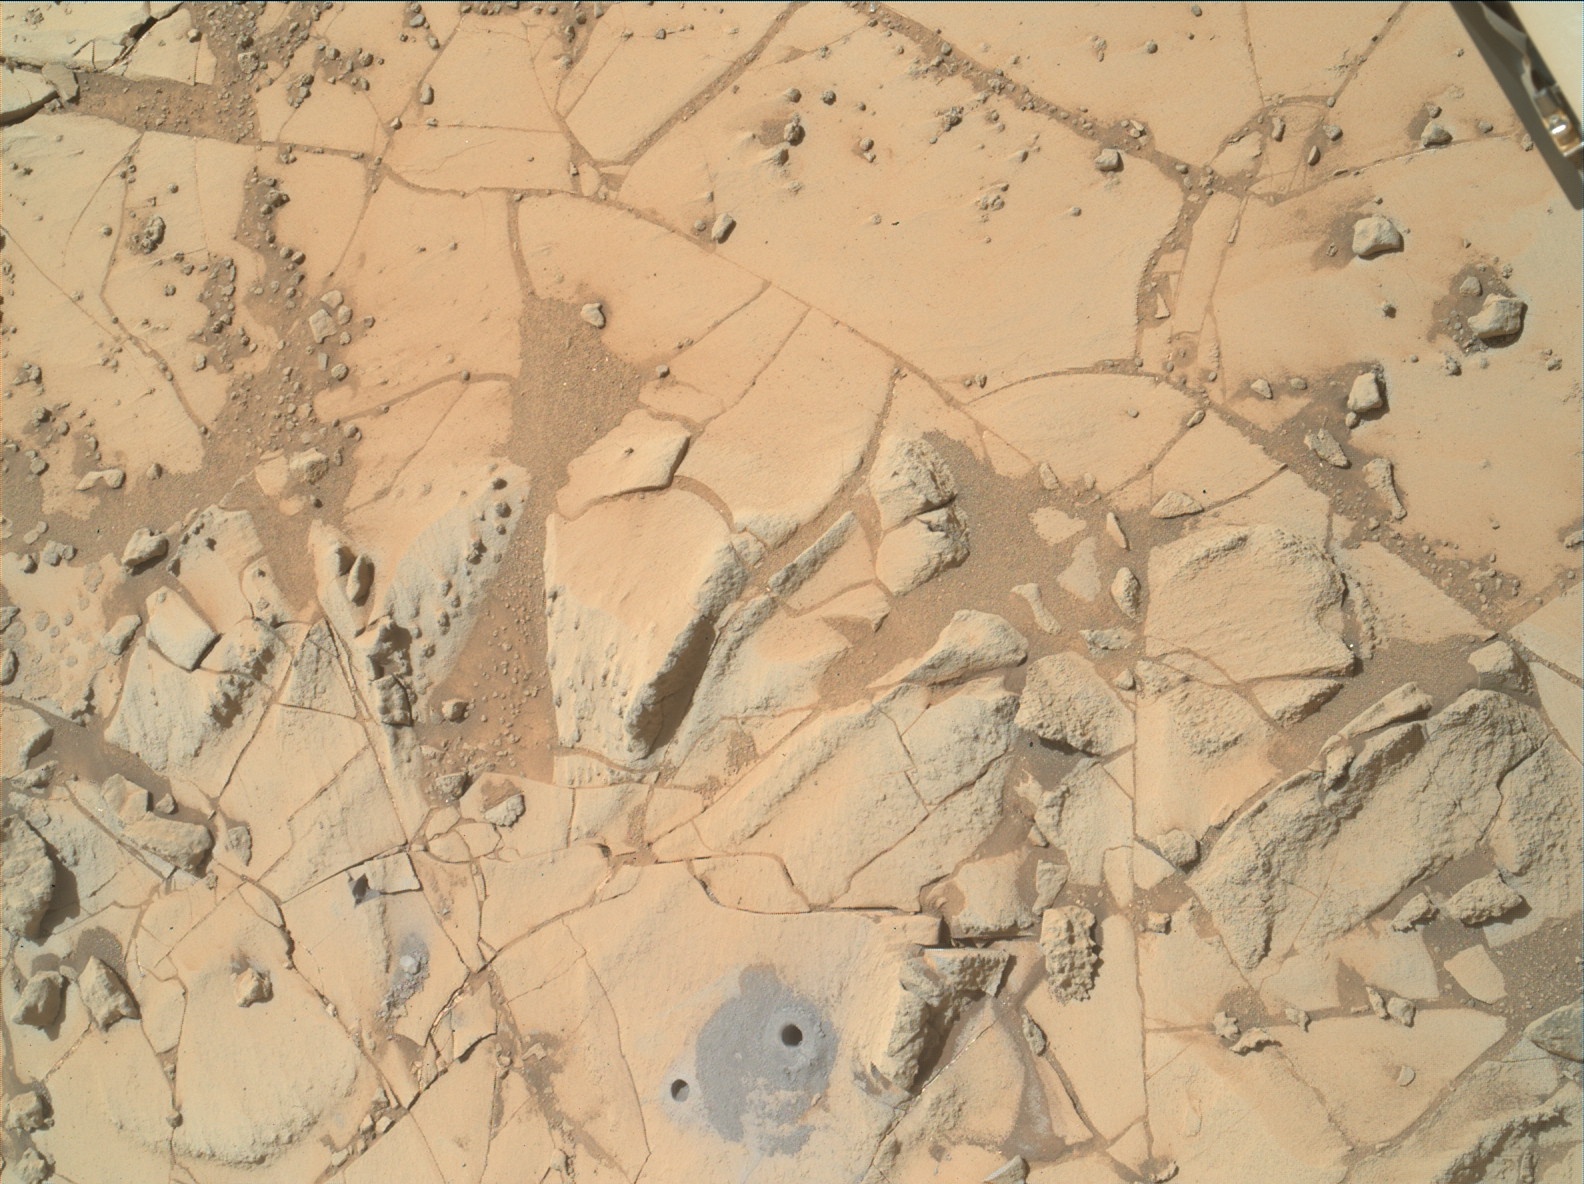 Nasa's Mars rover Curiosity acquired this image using its Mars Hand Lens Imager (MAHLI) on Sol 884